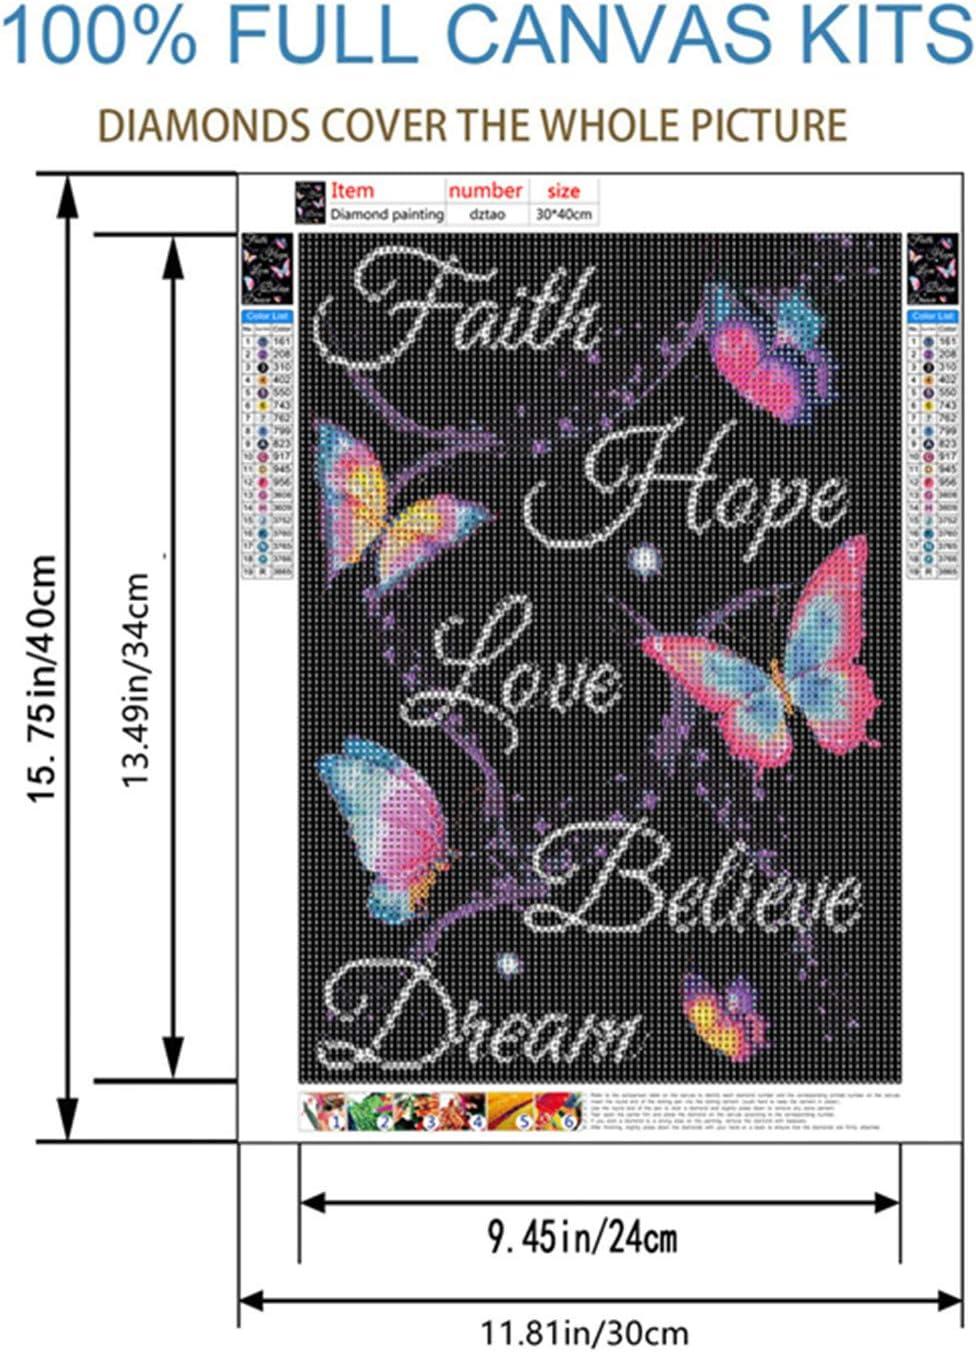 Sparkly Selections Faith, Hope and Love Glow in the Dark Diamond Art Kit